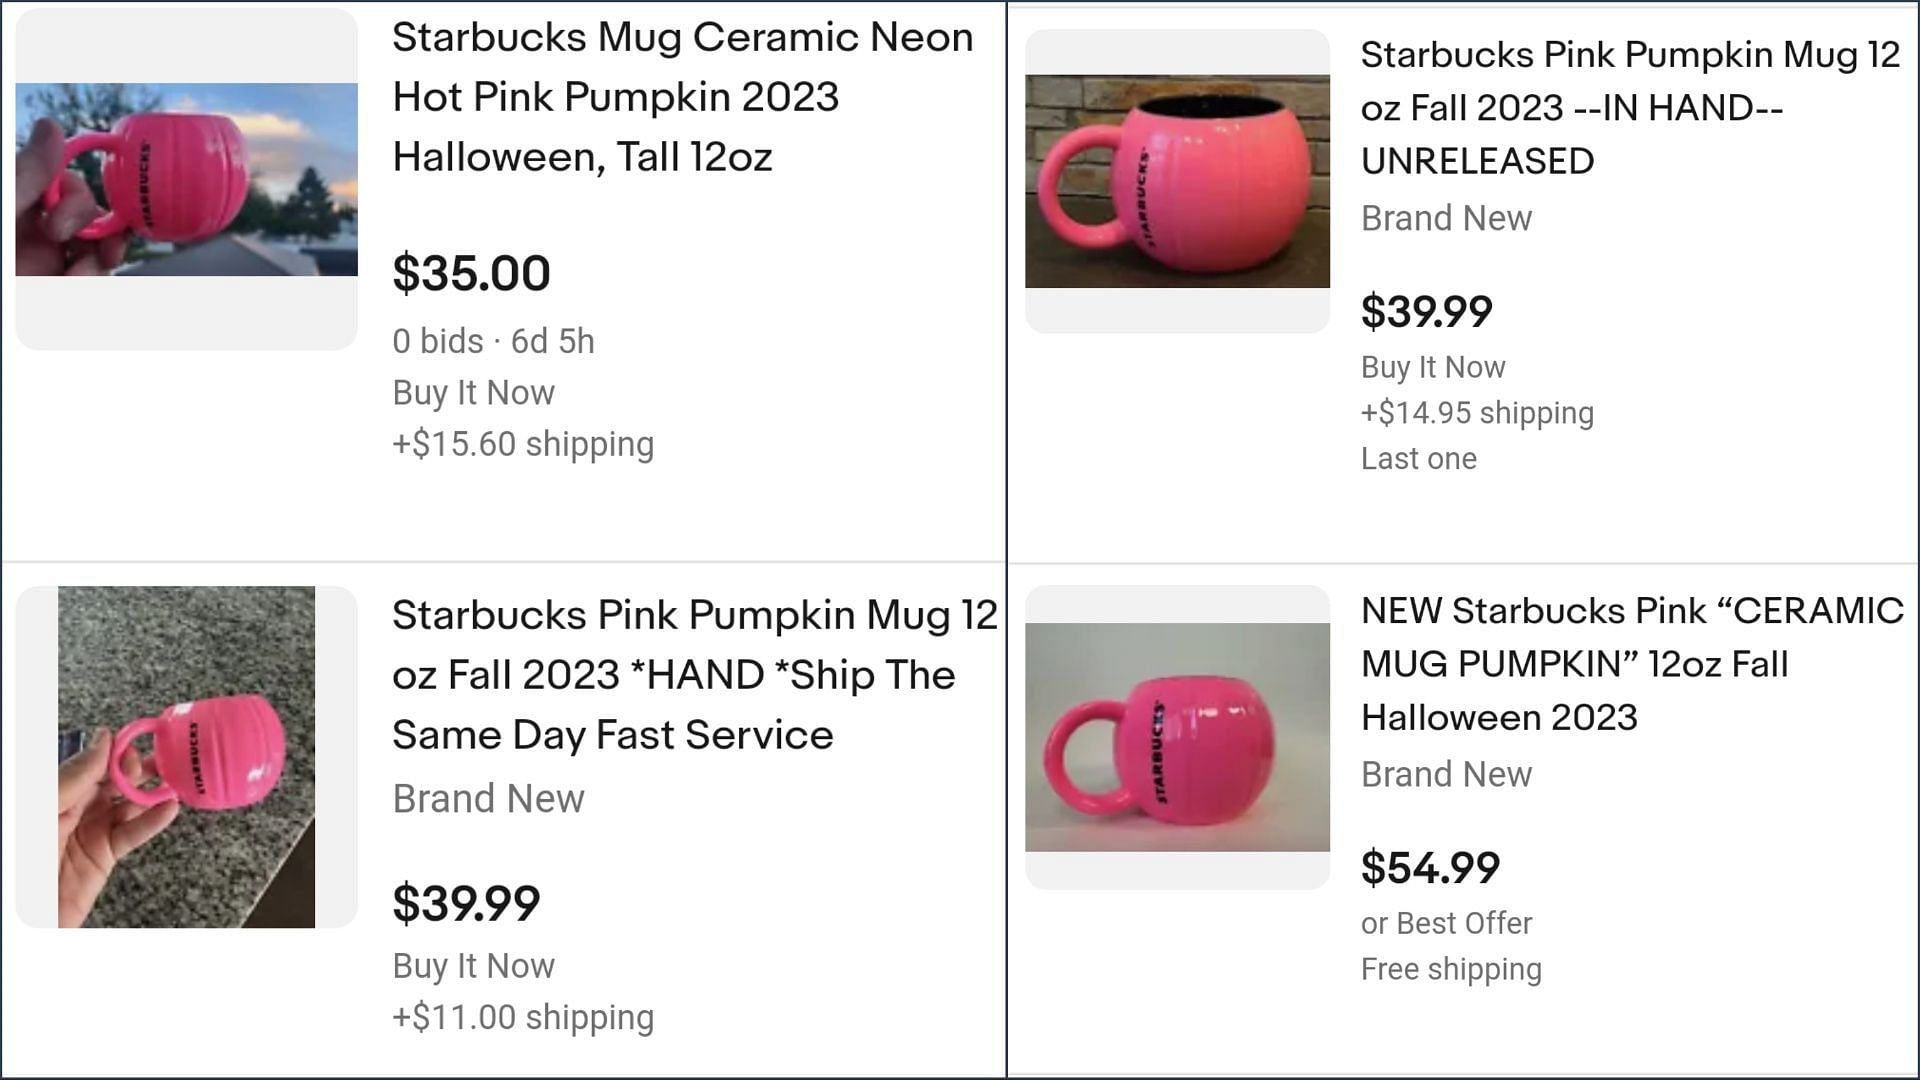 The rumored Pink Pumpkin Mug started appearing on TikTok this week but there has been no confirmation of its launch (Image via eBay)